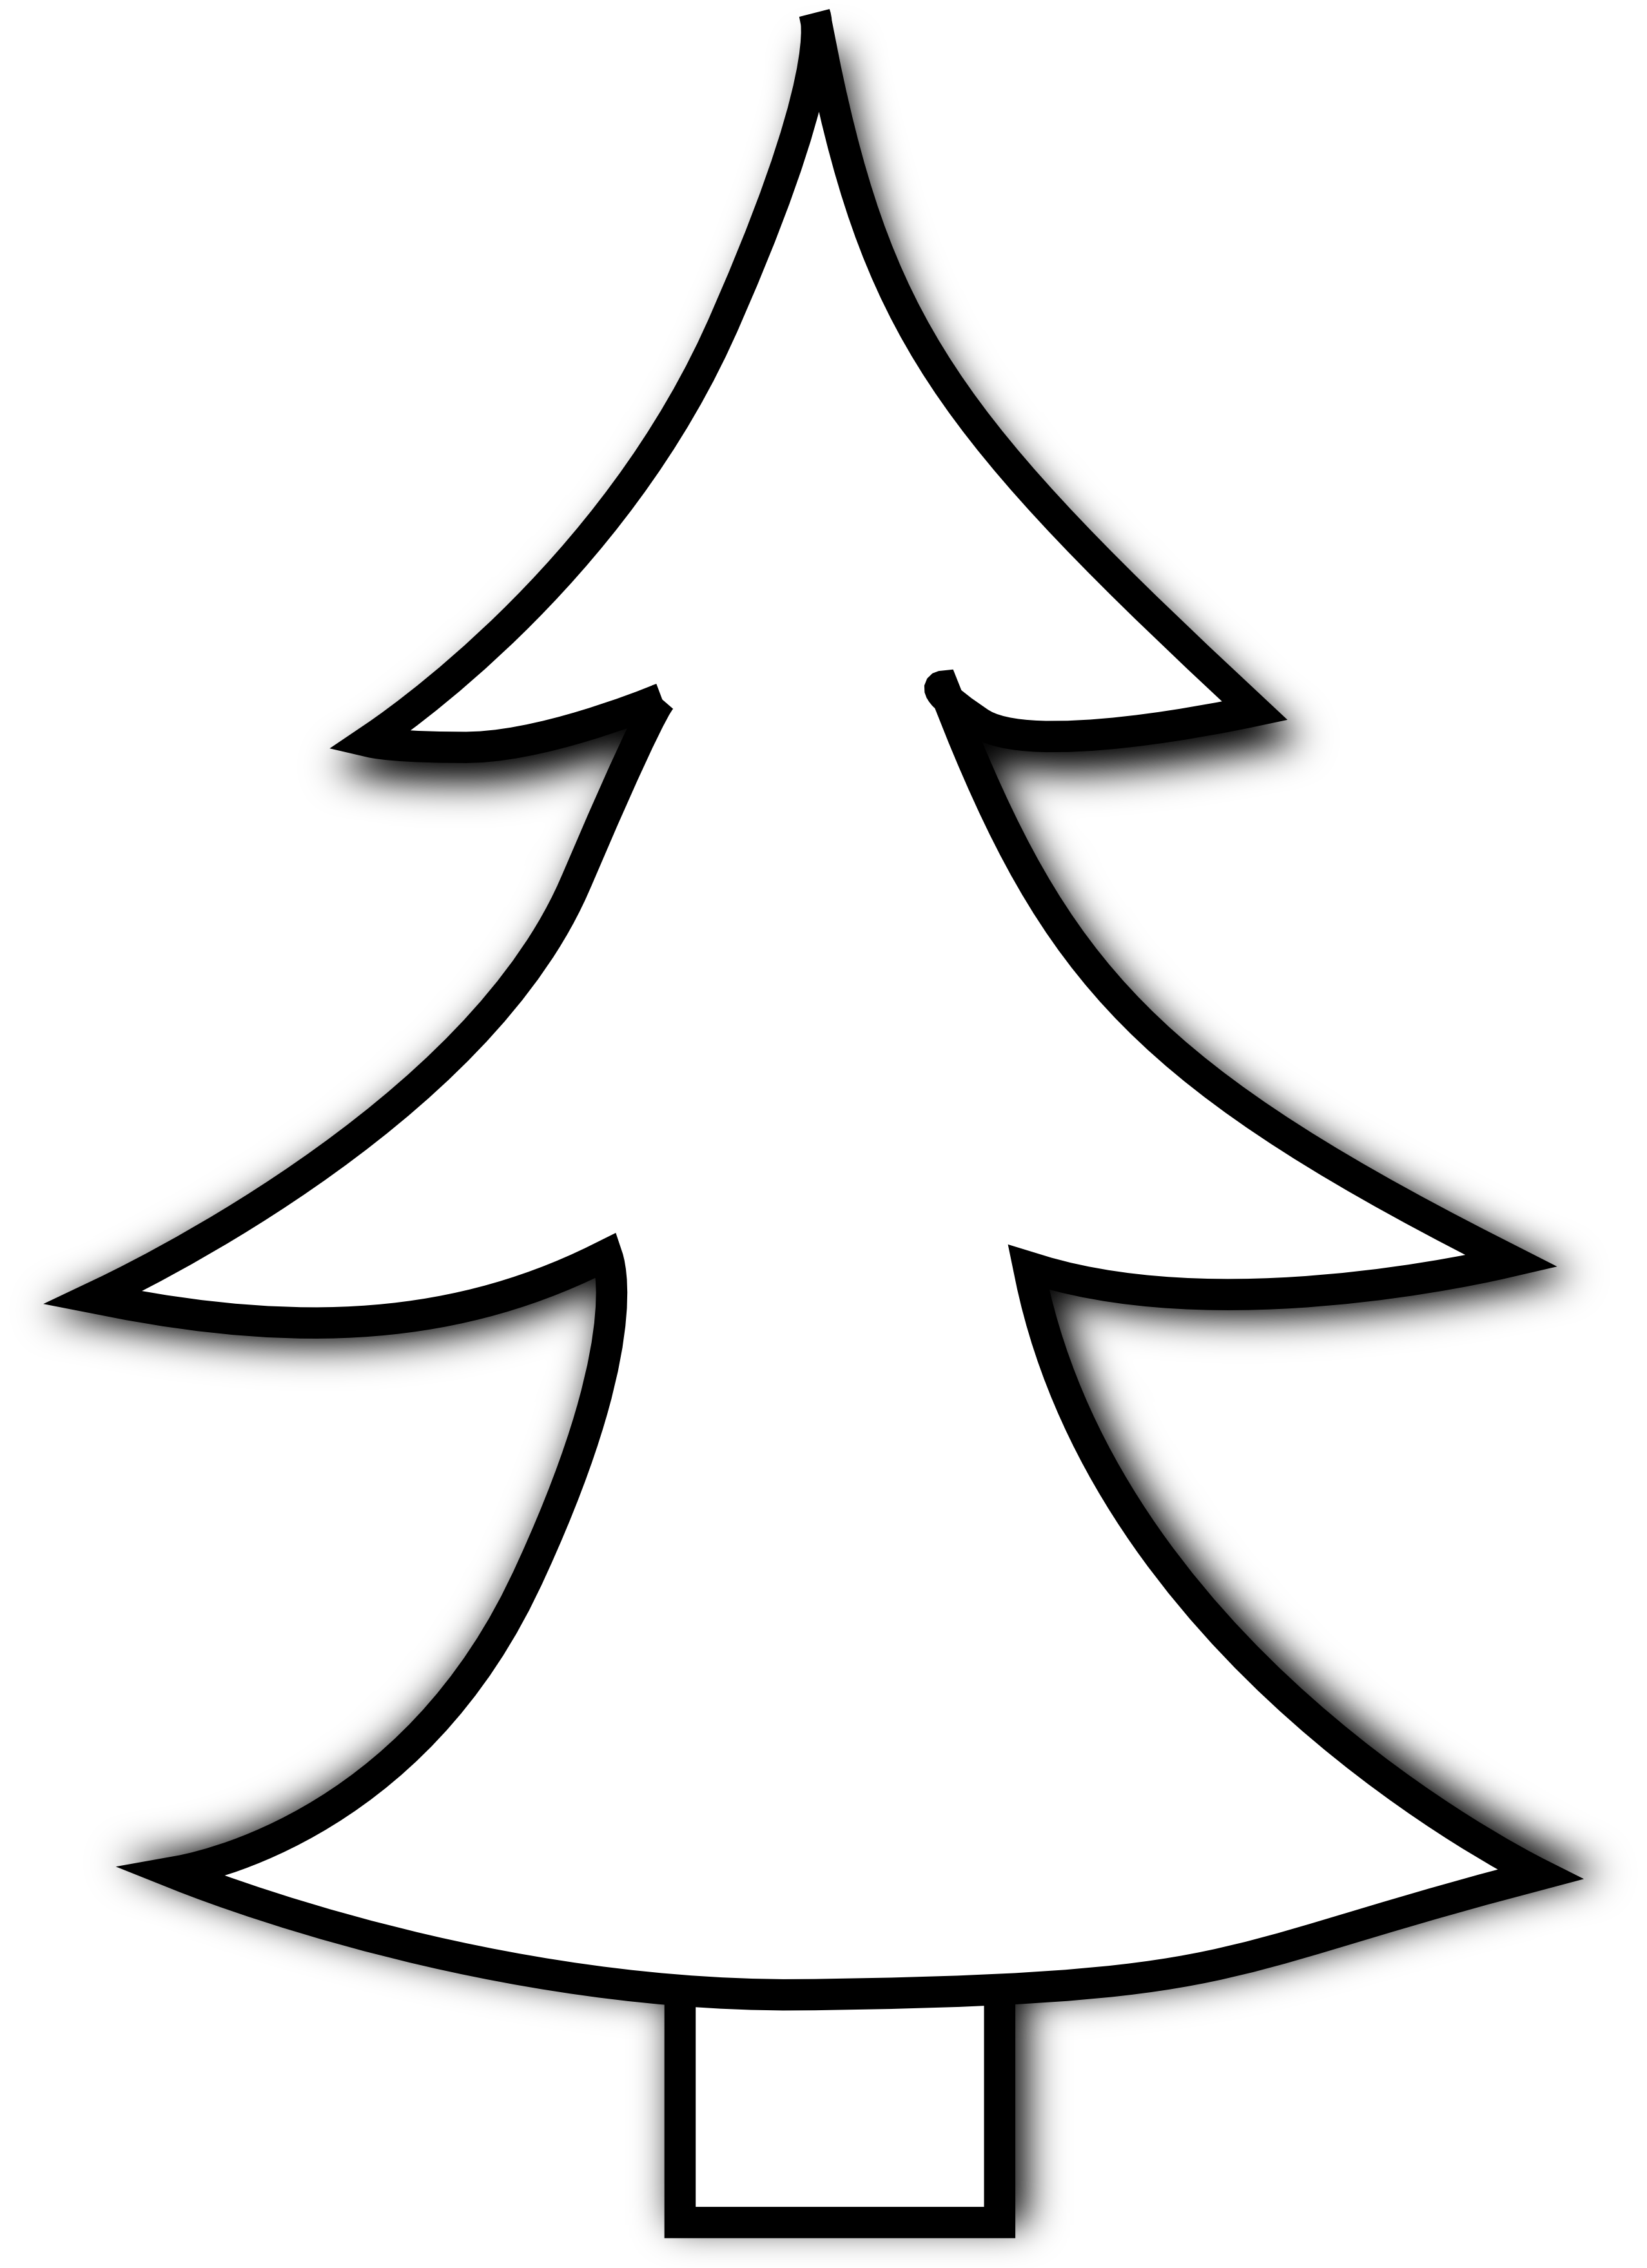 Simple christmas decorations clipart black and white.